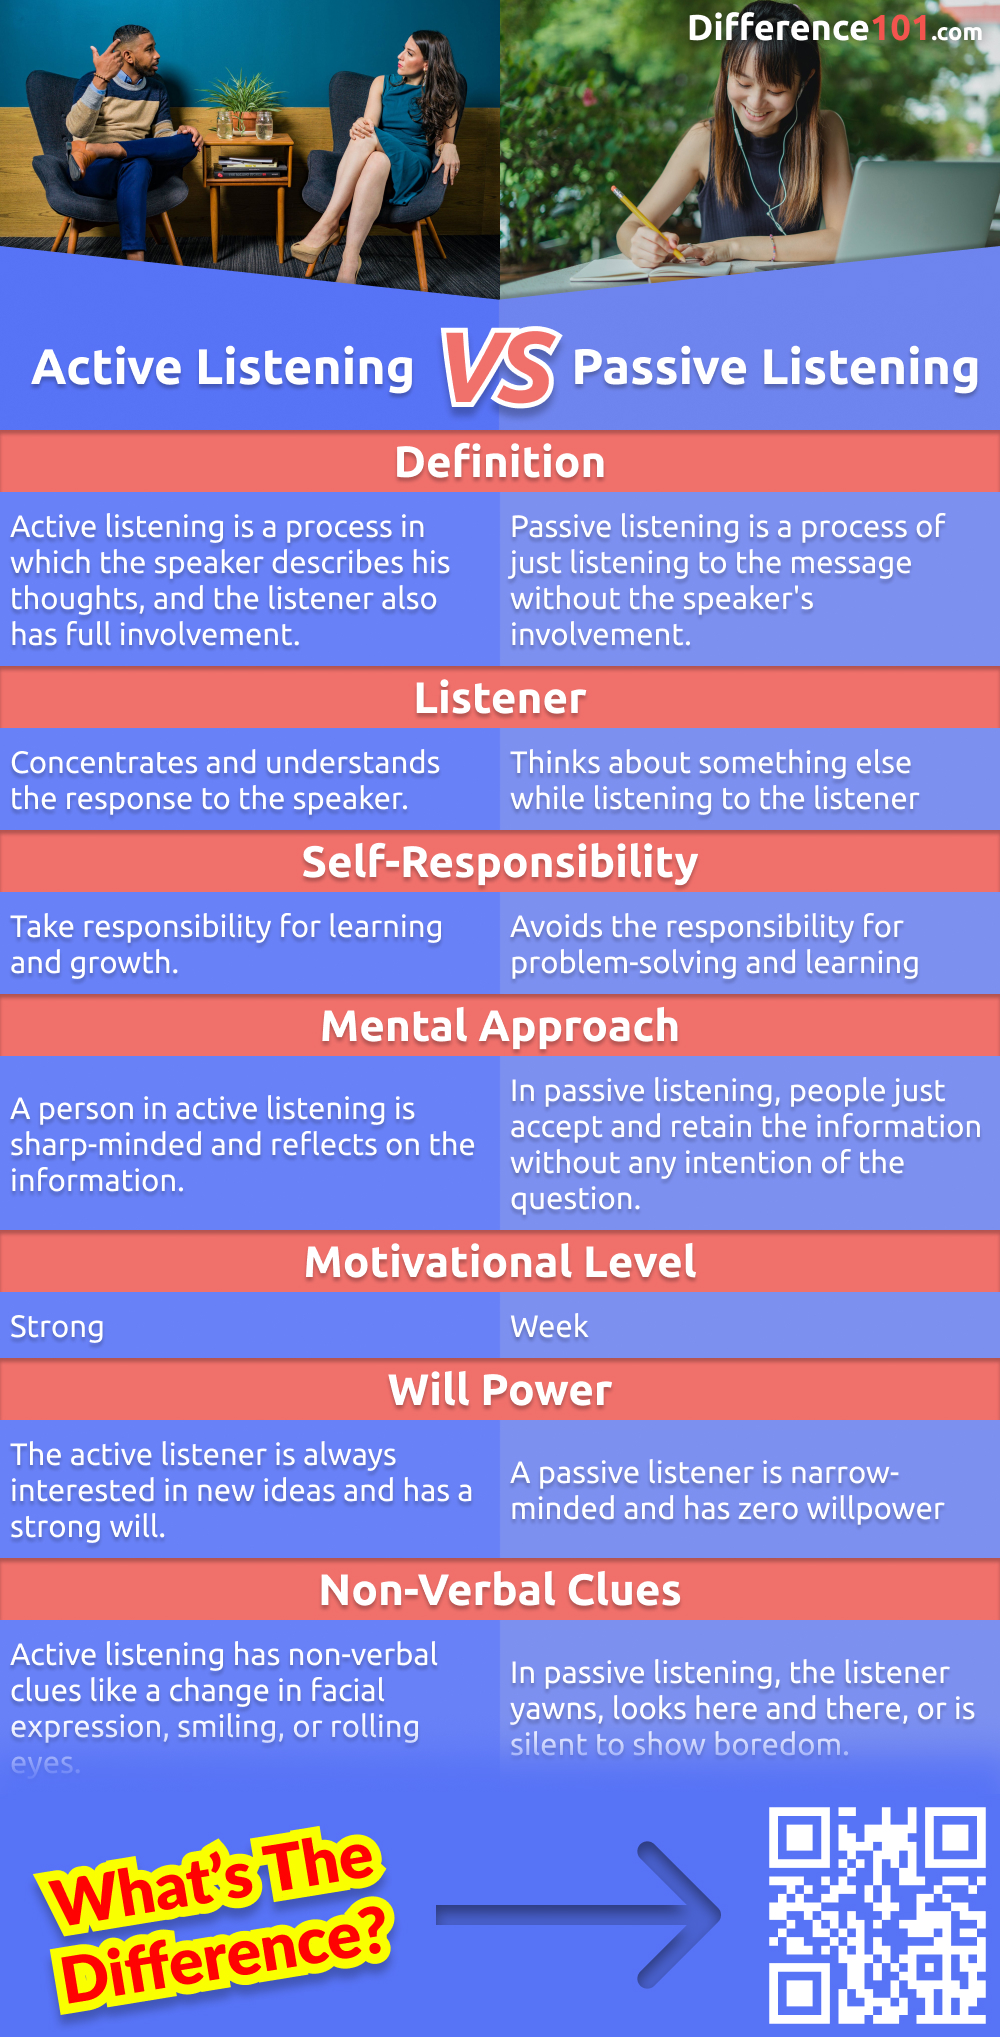 Active listening requires the listener to fully engage with the speaker, while passive listening involves minimal involvement. Both have their pros and cons. Read more here to find out their differences